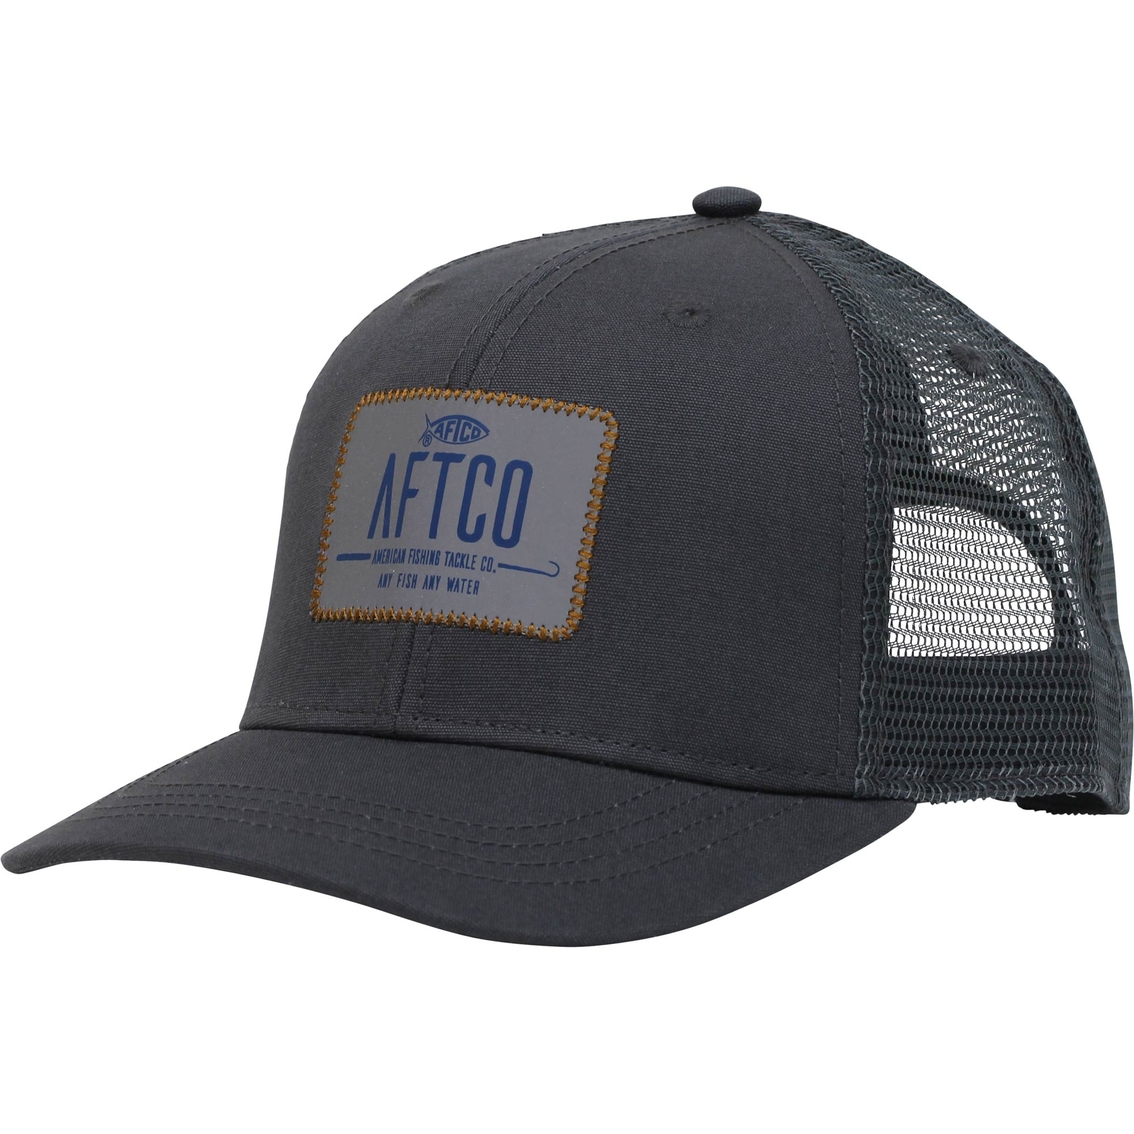 Aftco Twisted Trucker Cap, Hats & Visors, Clothing & Accessories